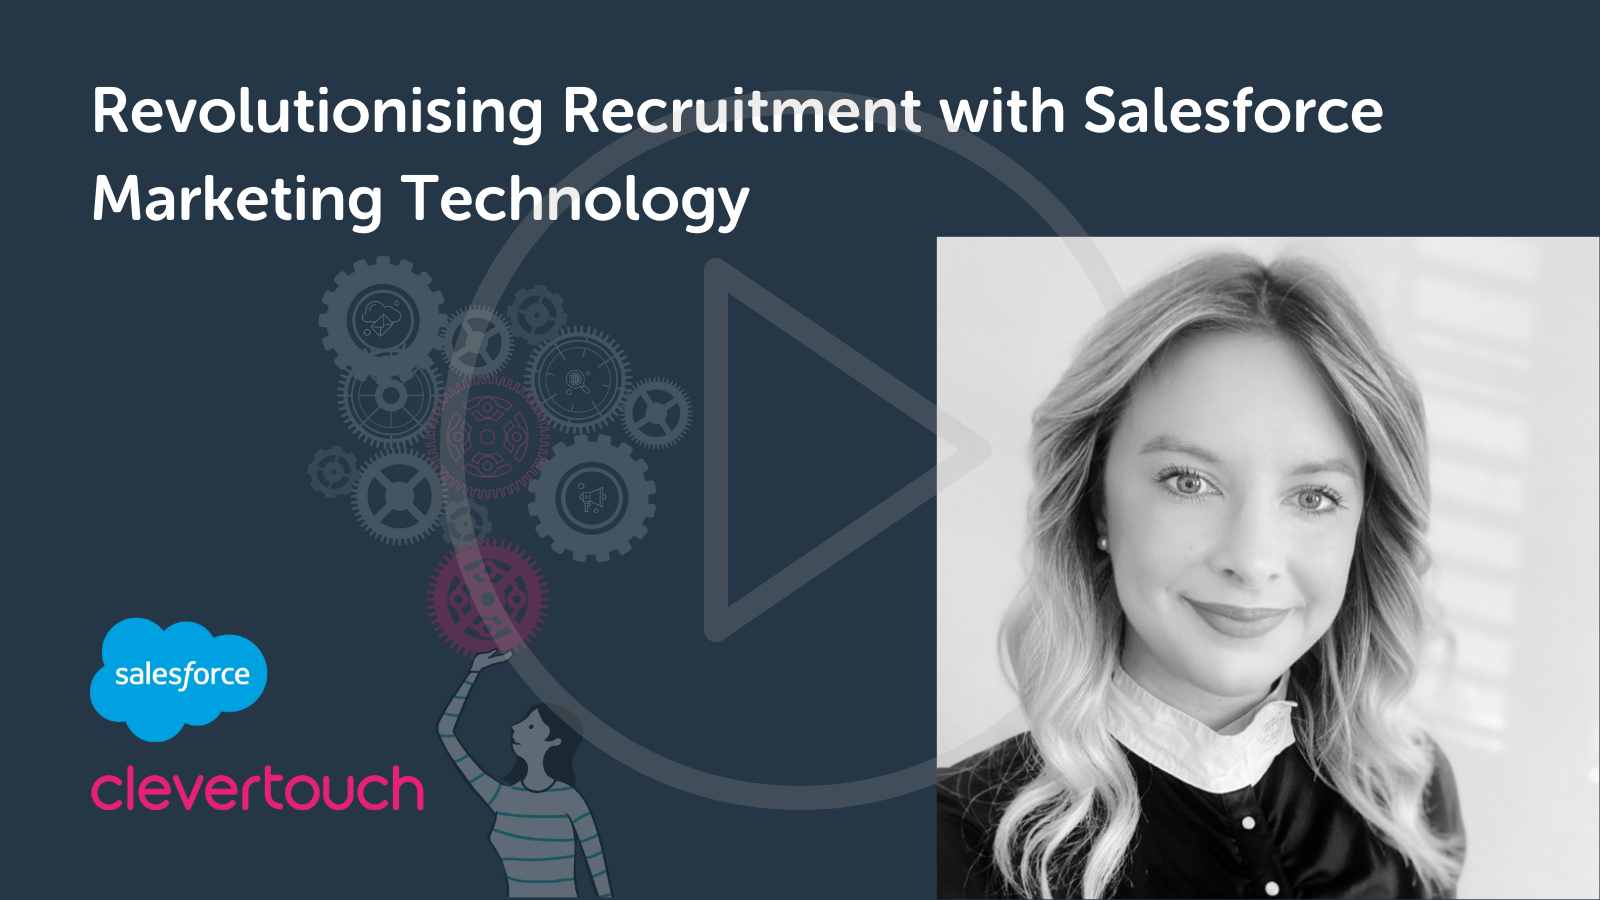 Revolutionising recruitment with Salesforce marketing technology webinar with Clevertouch